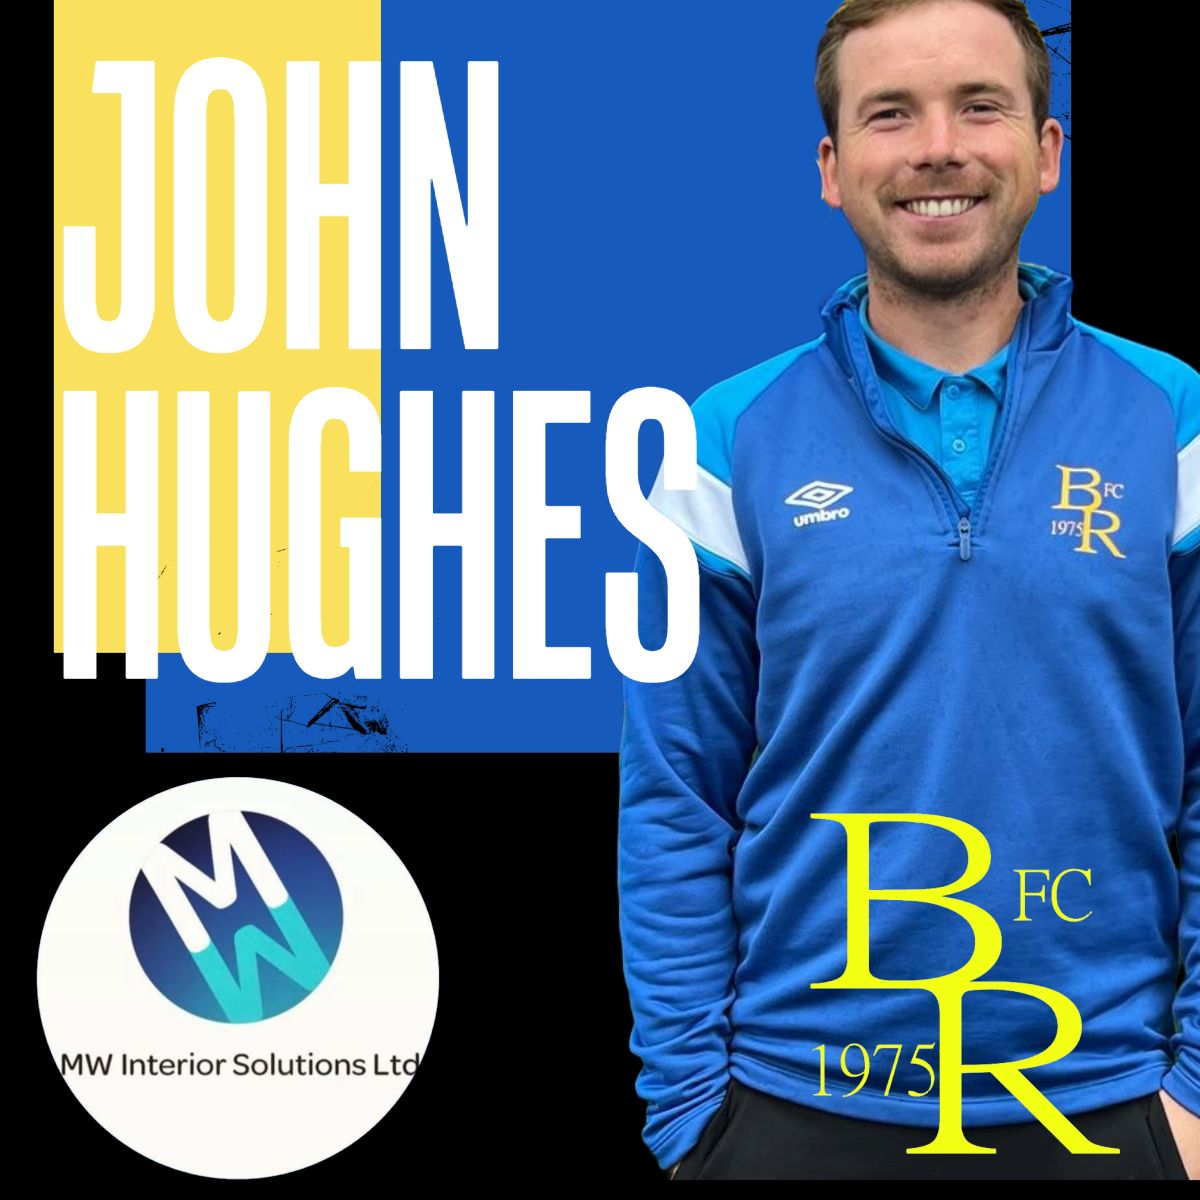 Some negative news out of the weekend as vice-skip, last year's player of the year and all round club legend @JohnHughes5 looks to have done some serious damage to his knee playing yesterday. A huge loss for the final games and just praying he's back OK asap